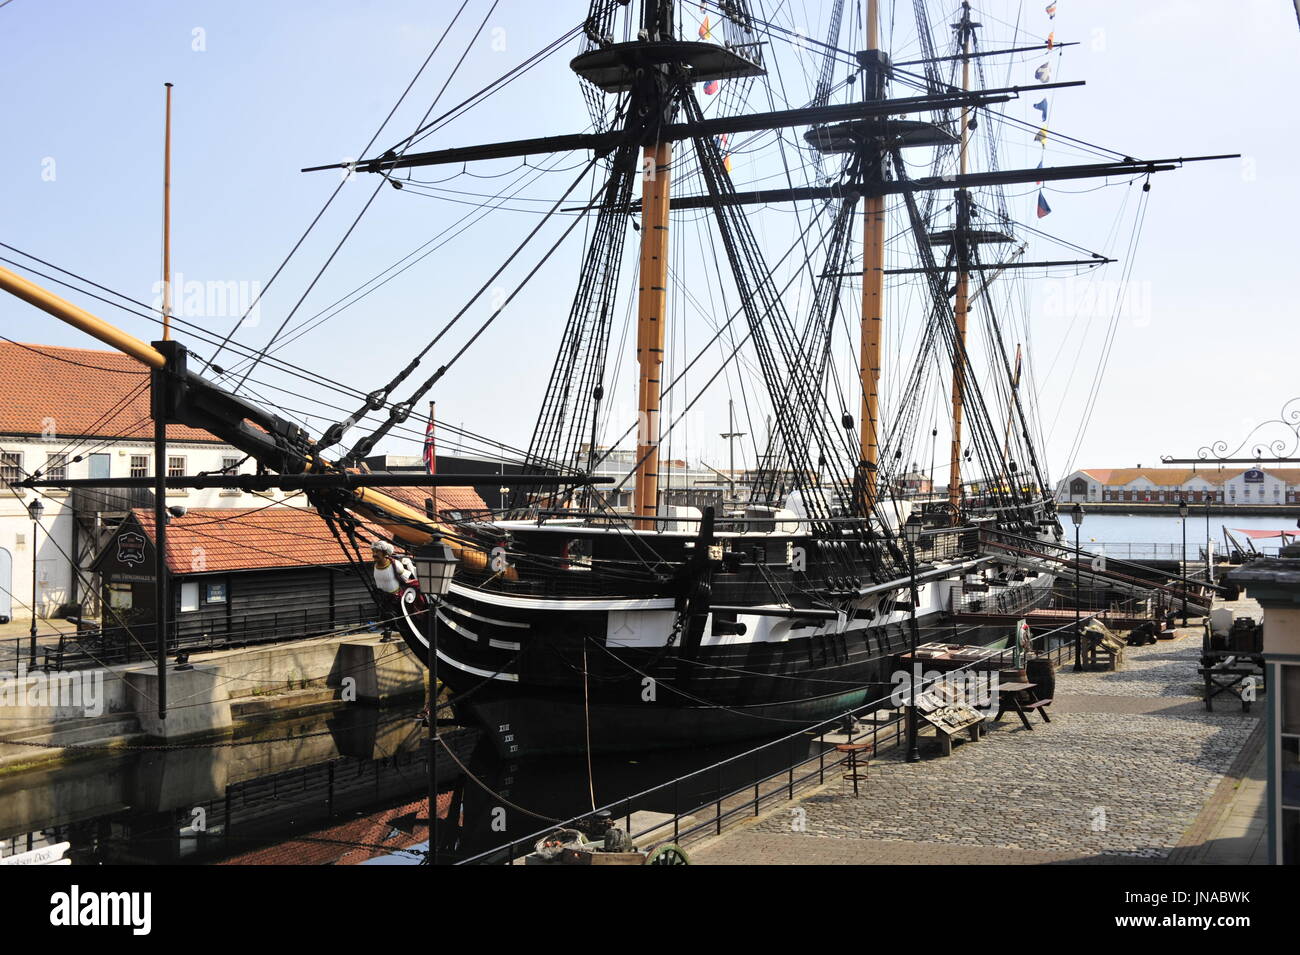 AJAXNETPHOTO. - 19TH JULY, 2016. HARTLEPOOL, ENGLAND. - HISTORICAL SHIP MUSEUM - THE RESTORED 19TH CENTURY FRIGATE HMS TRINCOMALEE (EX T.S.FOUDROYANT, EX TRINCOMALEE.). PHOTO:TONY HOLLAND/AJAX REF:DTH161907 32269 Stock Photo